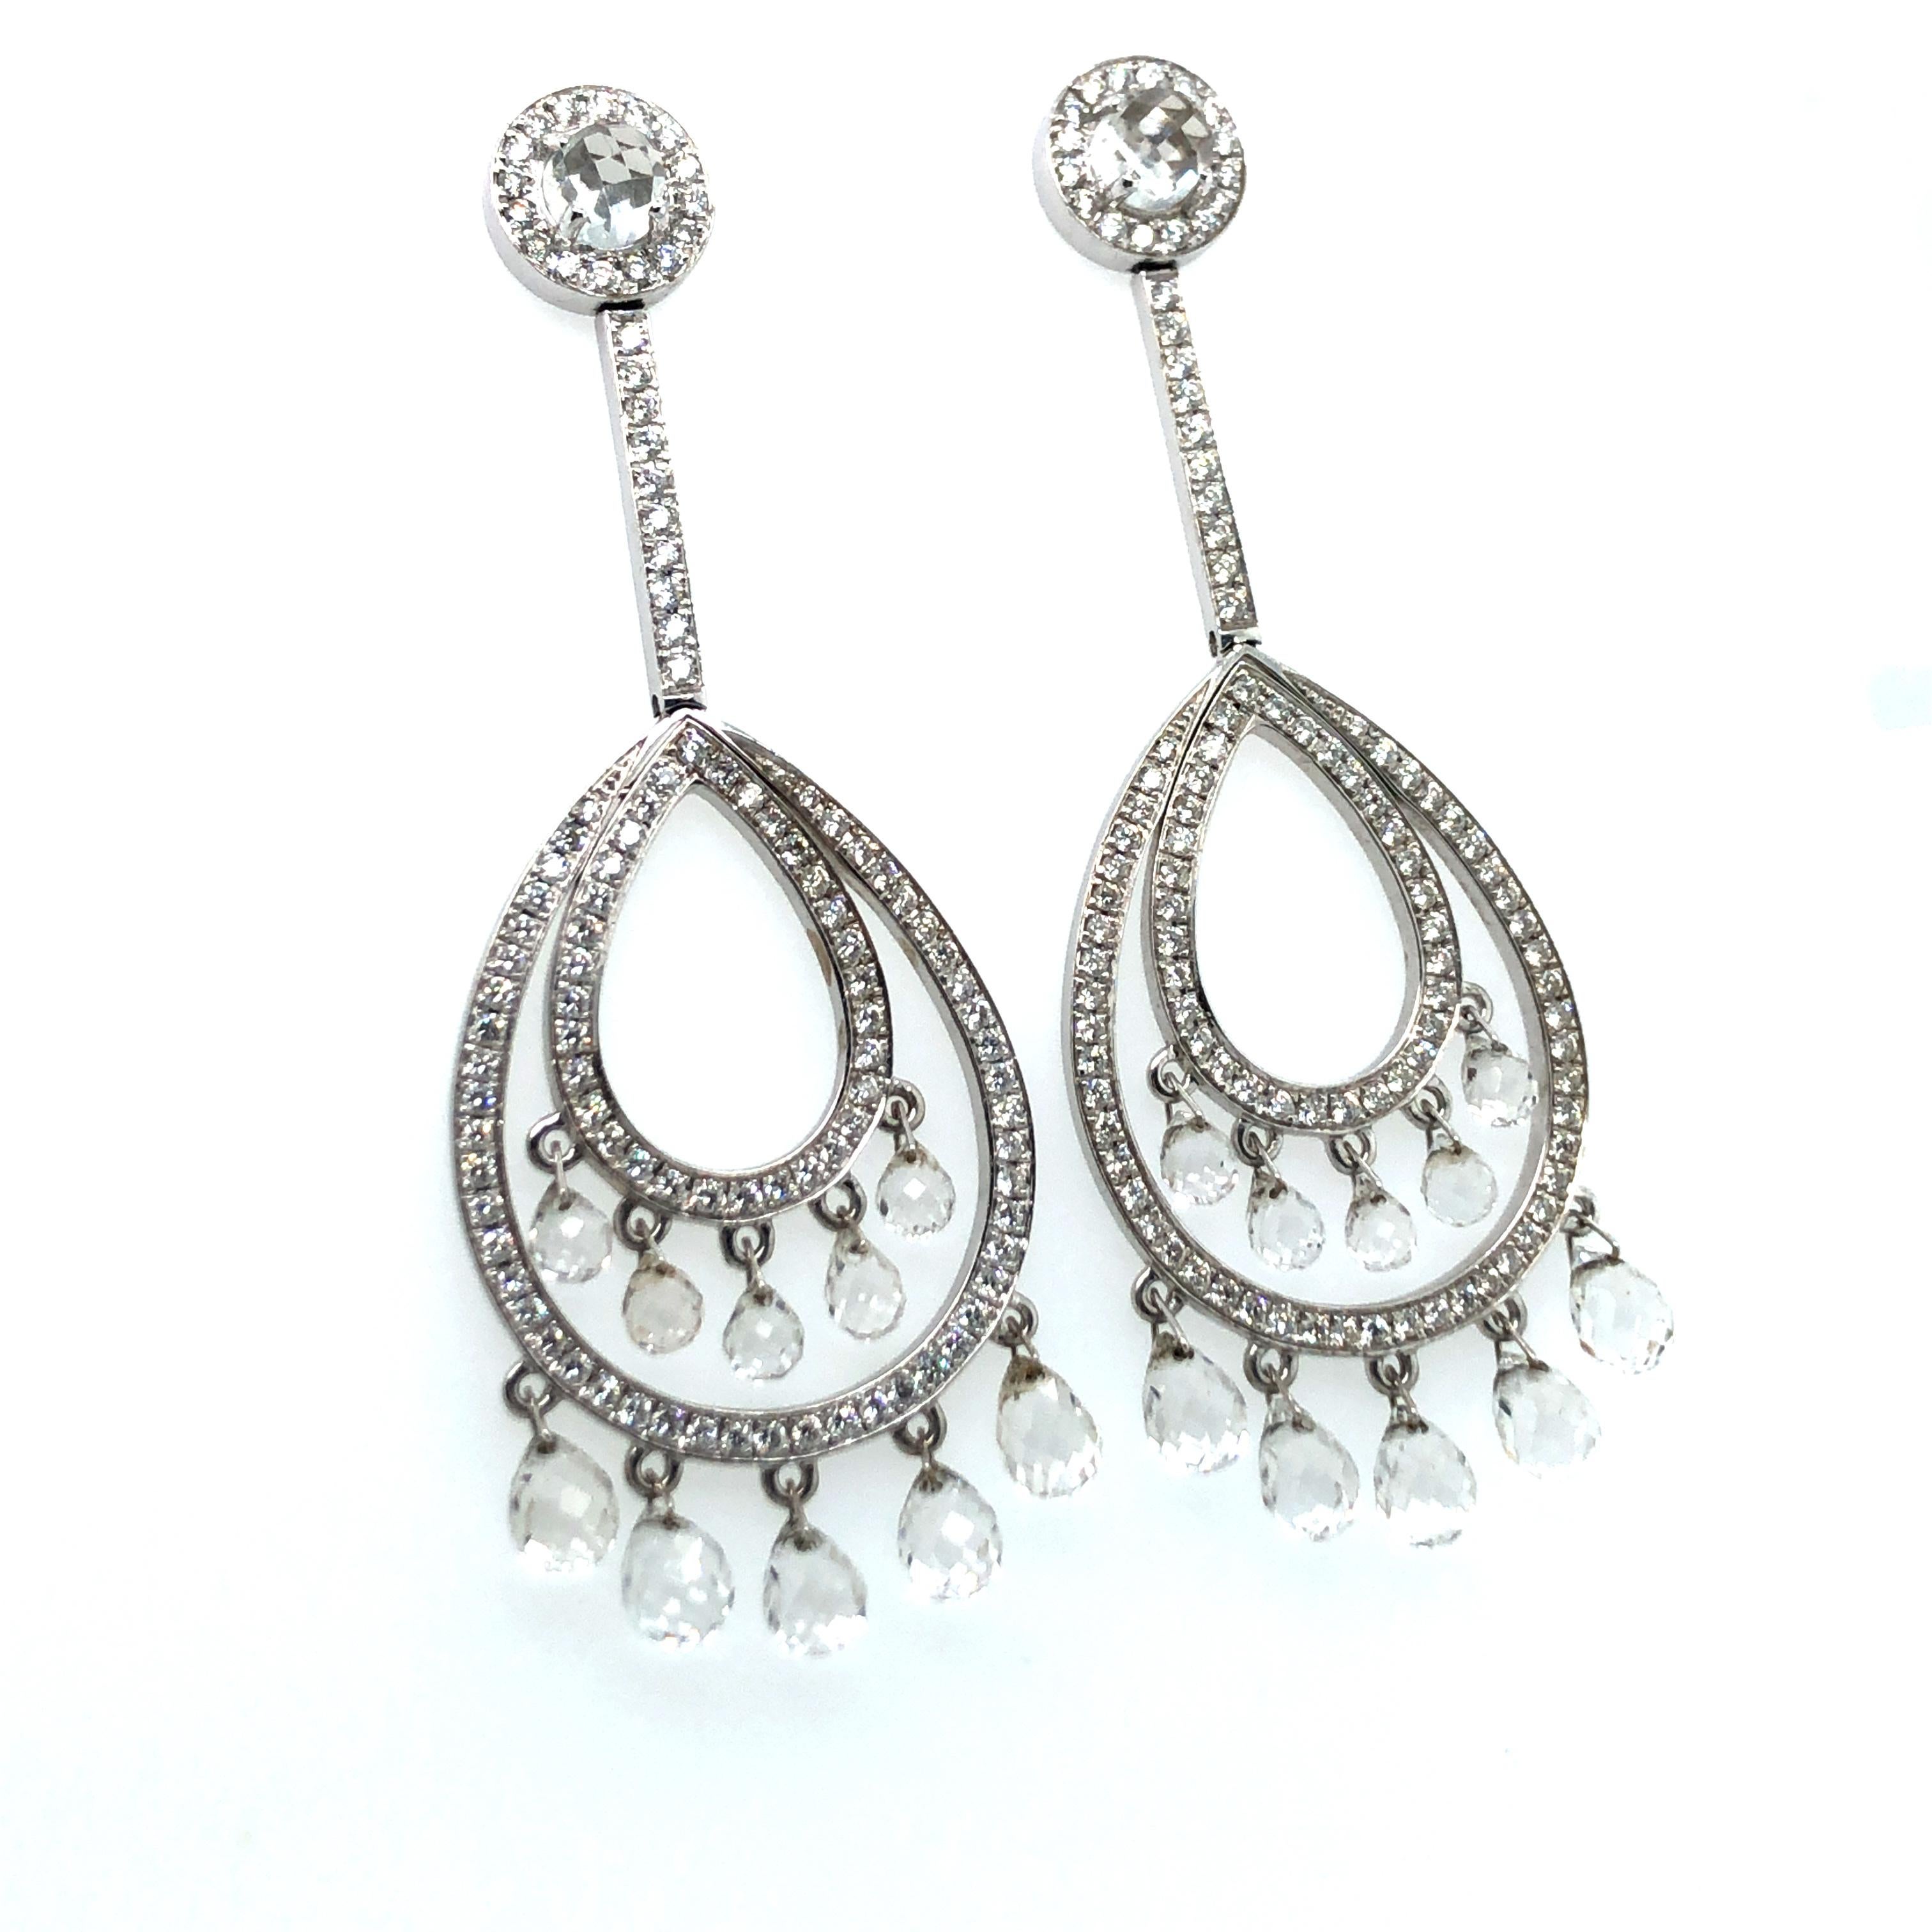 Contemporary Fabulous Rock Crystal and Diamond Pendant Earrings in 18 Karat White Gold For Sale